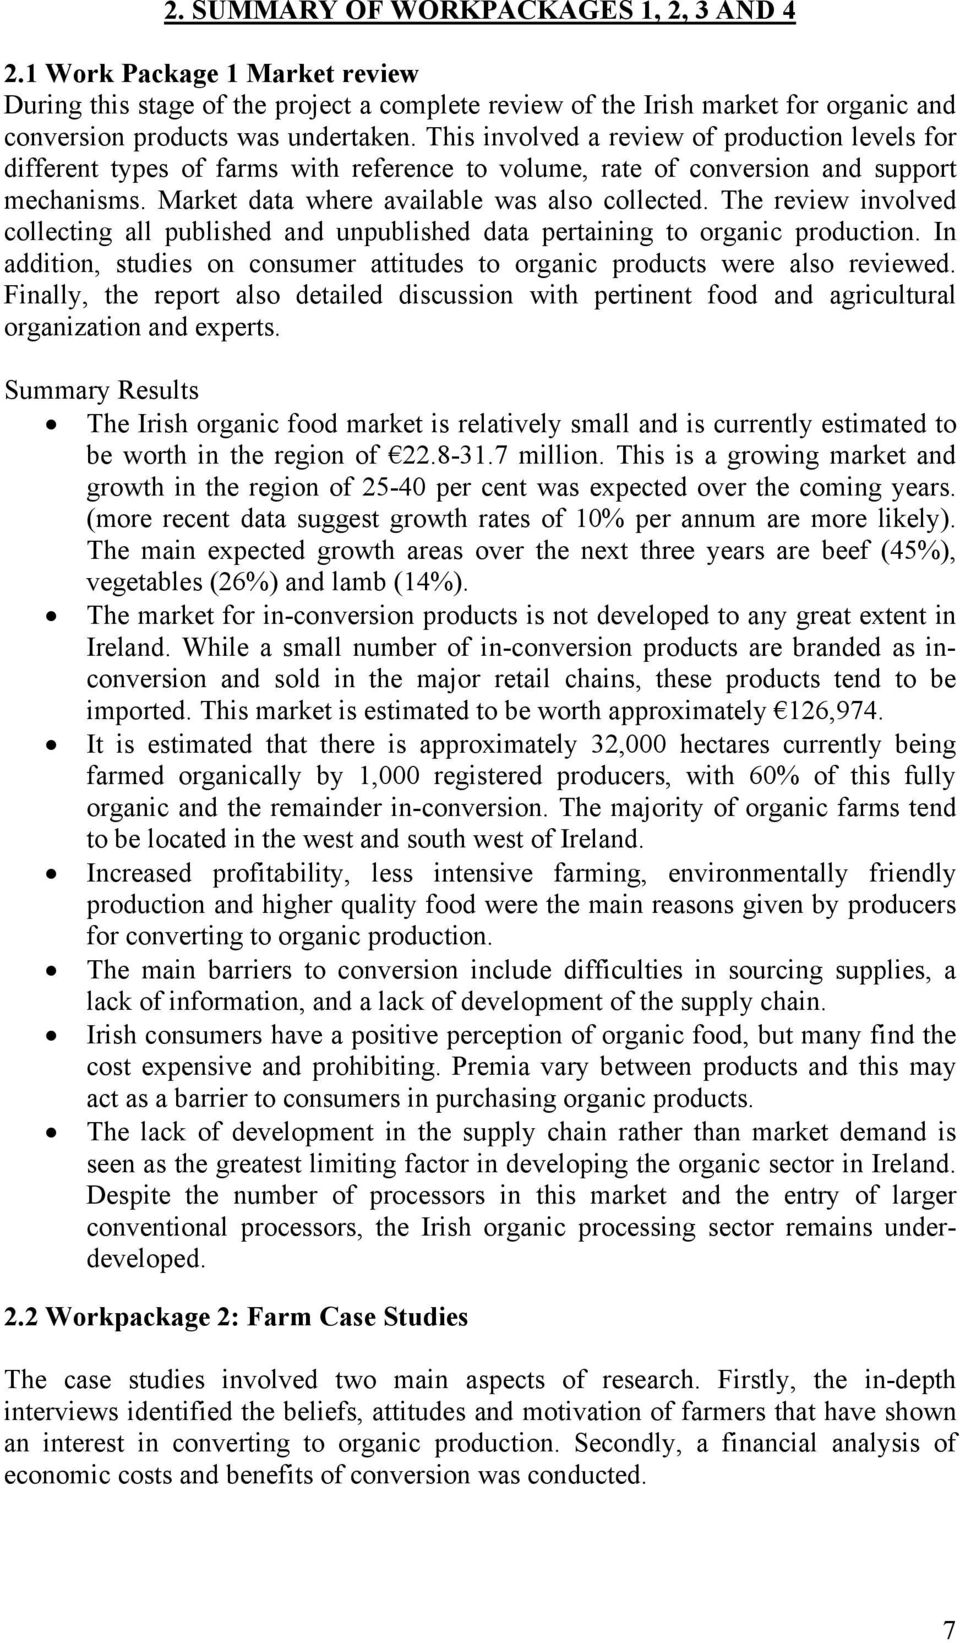 The review involved collecting all published and unpublished data pertaining to organic production. In addition, studies on consumer attitudes to organic products were also reviewed.